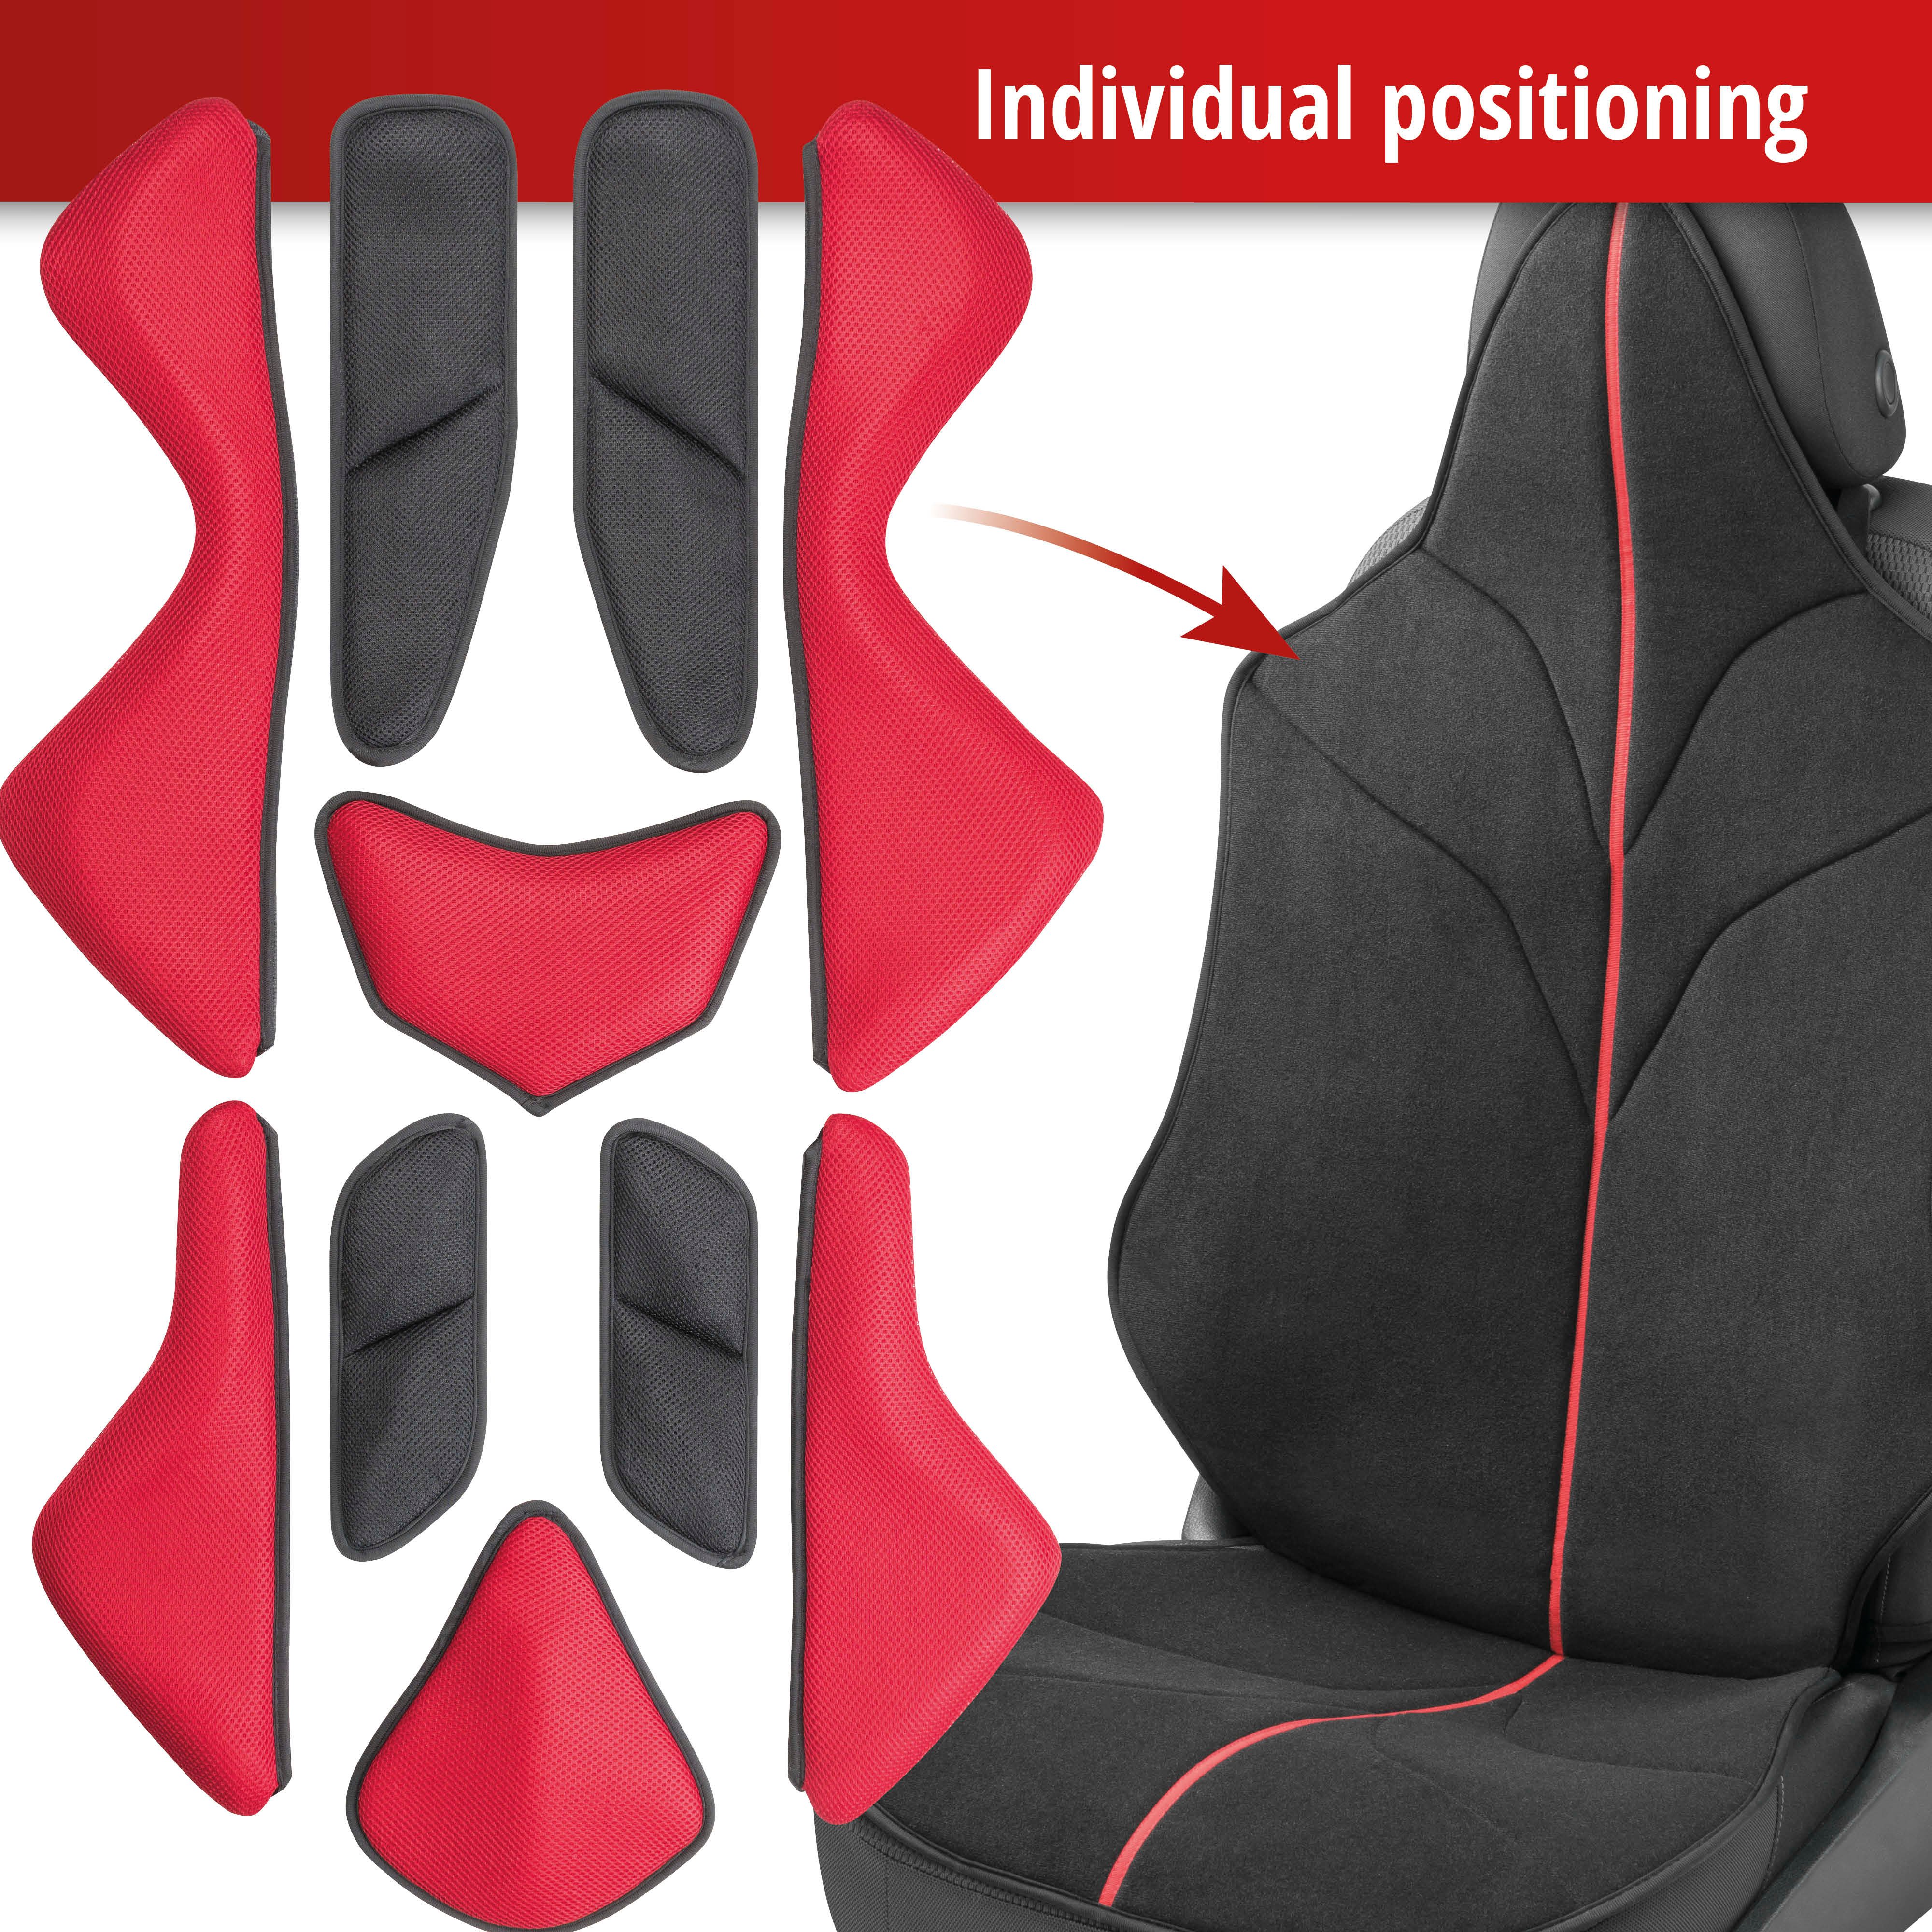 Car Seat cover X-Race black red